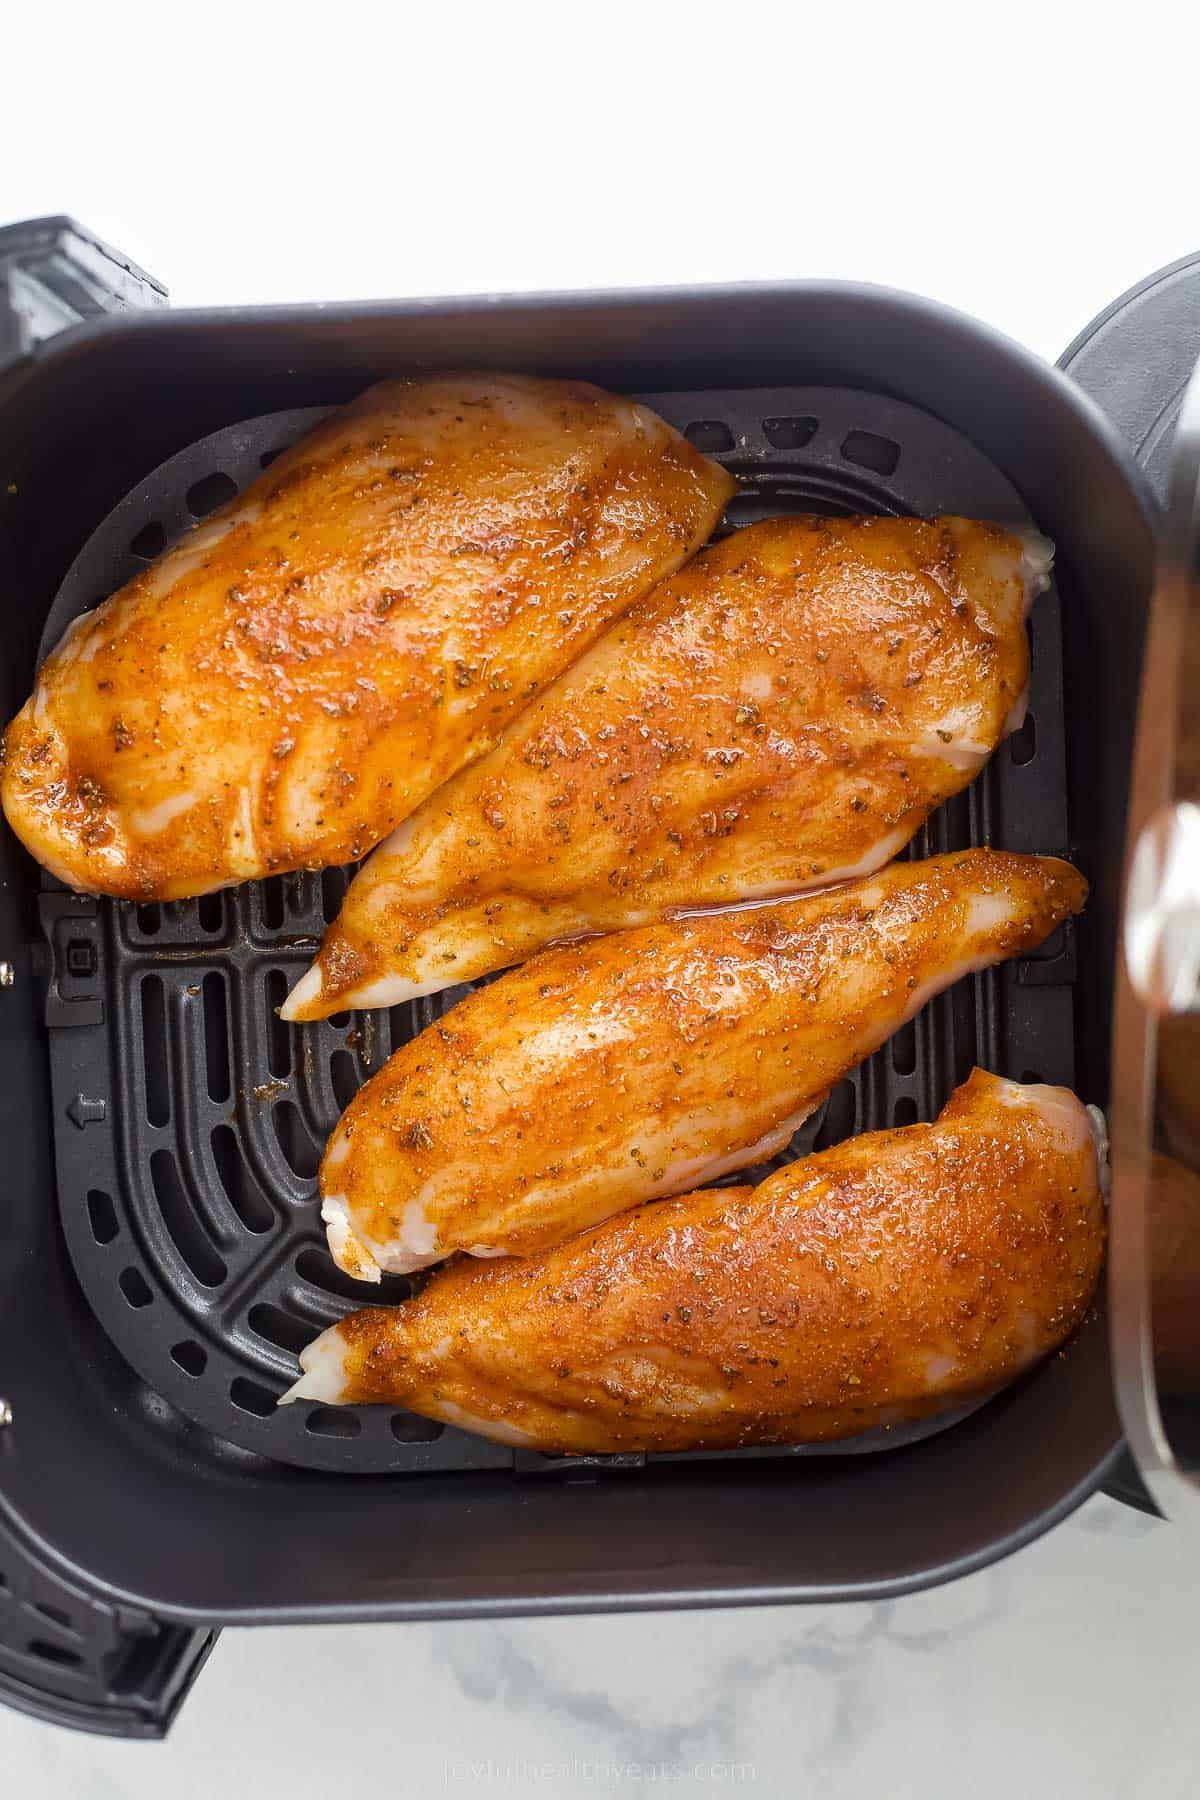 uncooked chicken breasts in an air fryer